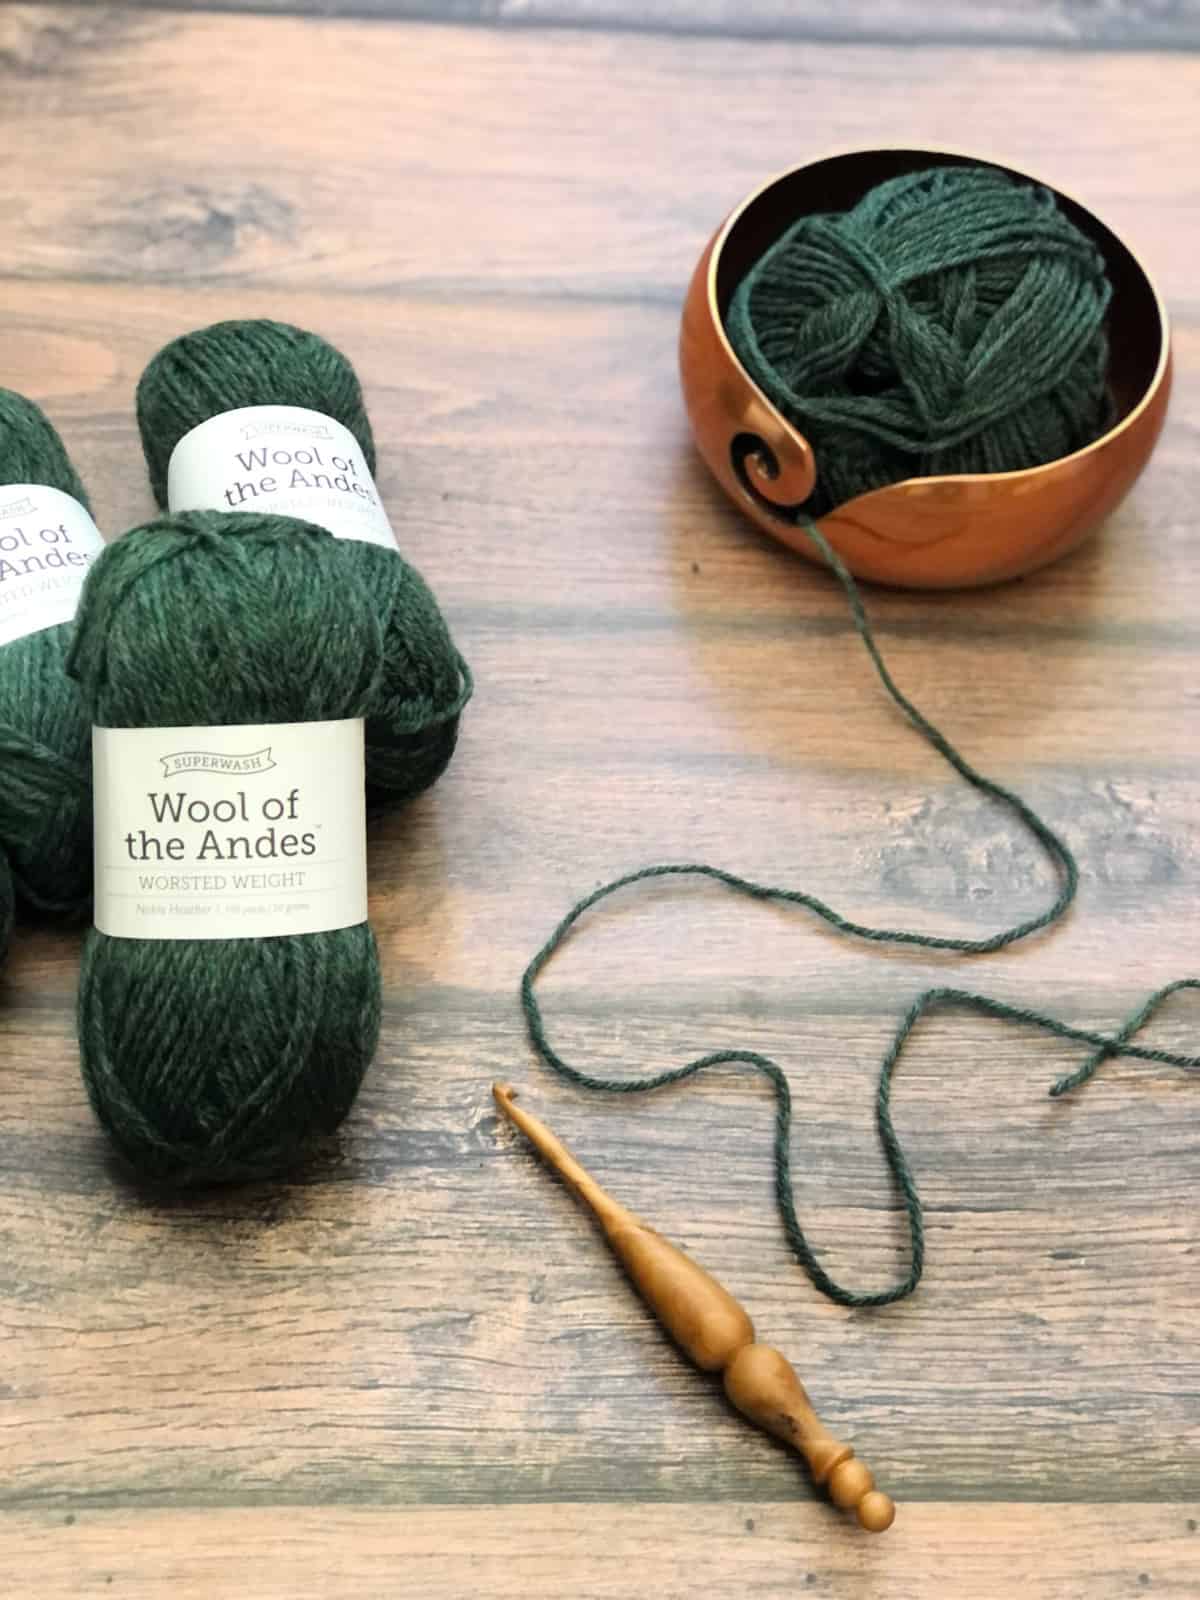 Green skeins of yarn and copper yarn bowl with ergonomic crochet hook.